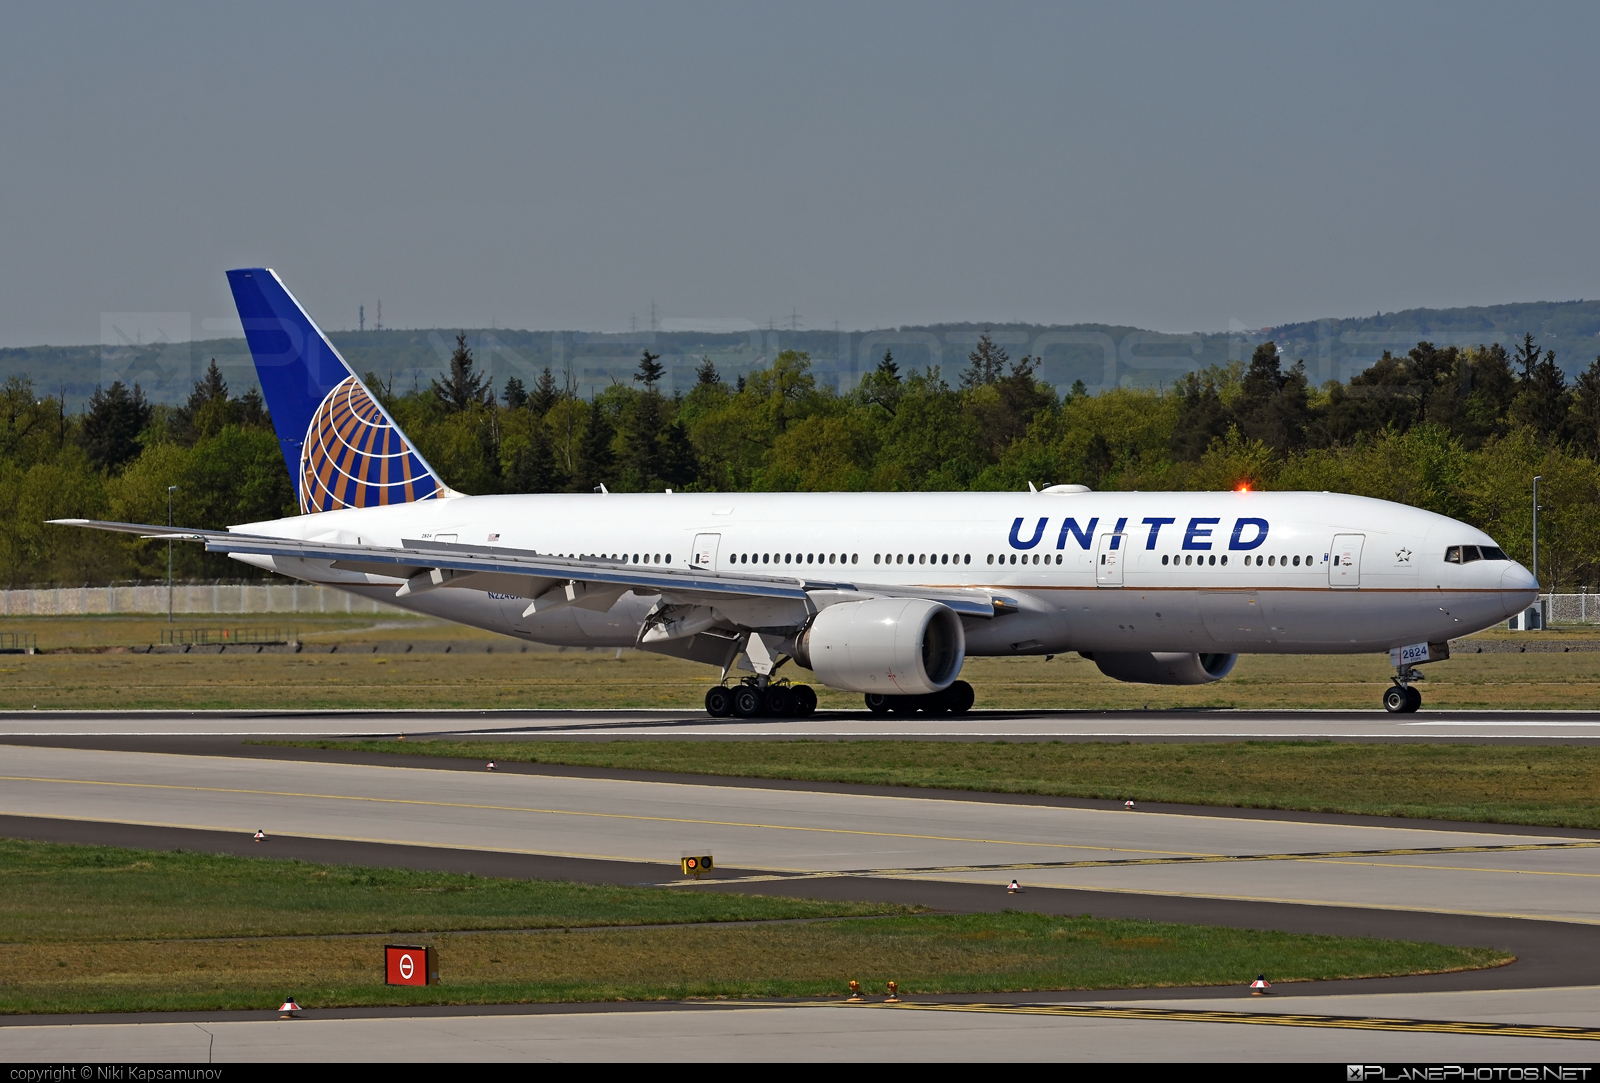 Boeing 777-200ER - N224UA operated by United Airlines #b777 #b777er #boeing #boeing777 #tripleseven #unitedairlines